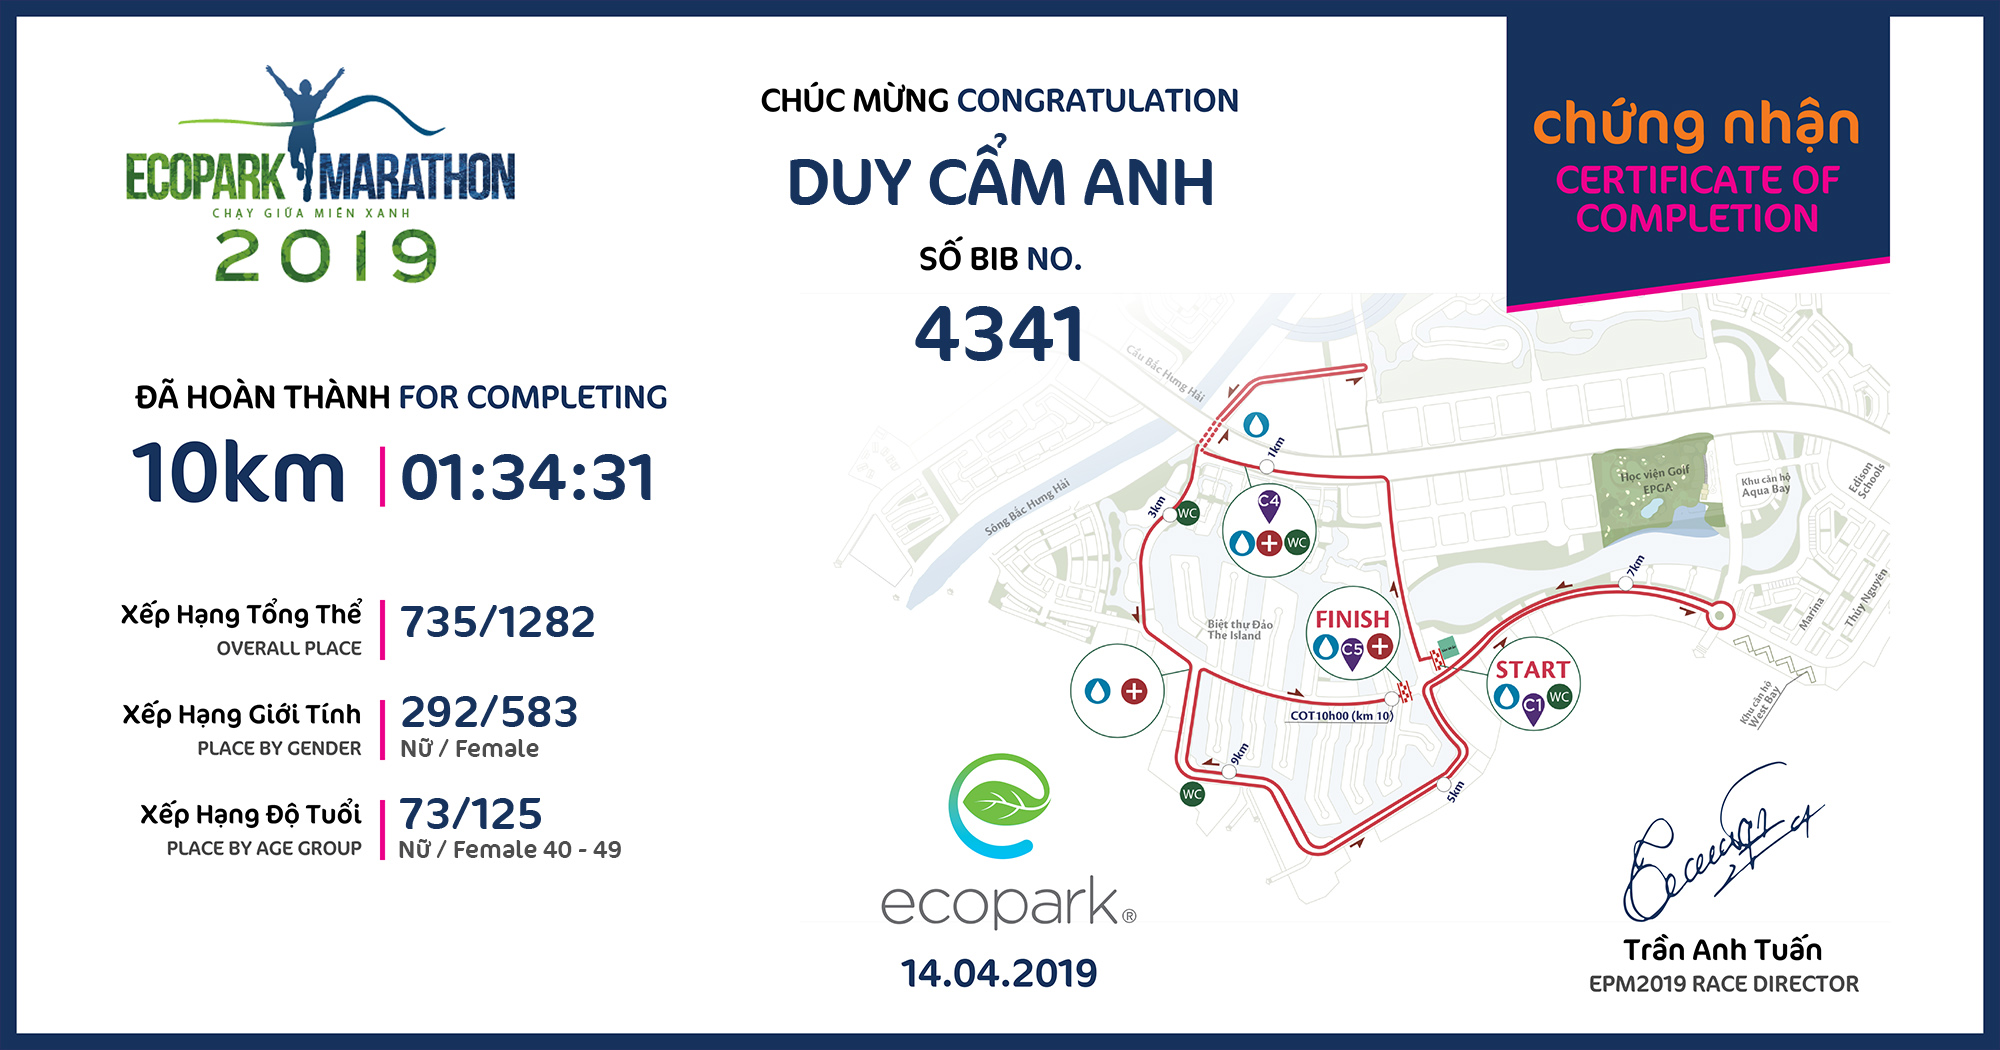 4341 - Duy Cẩm Anh